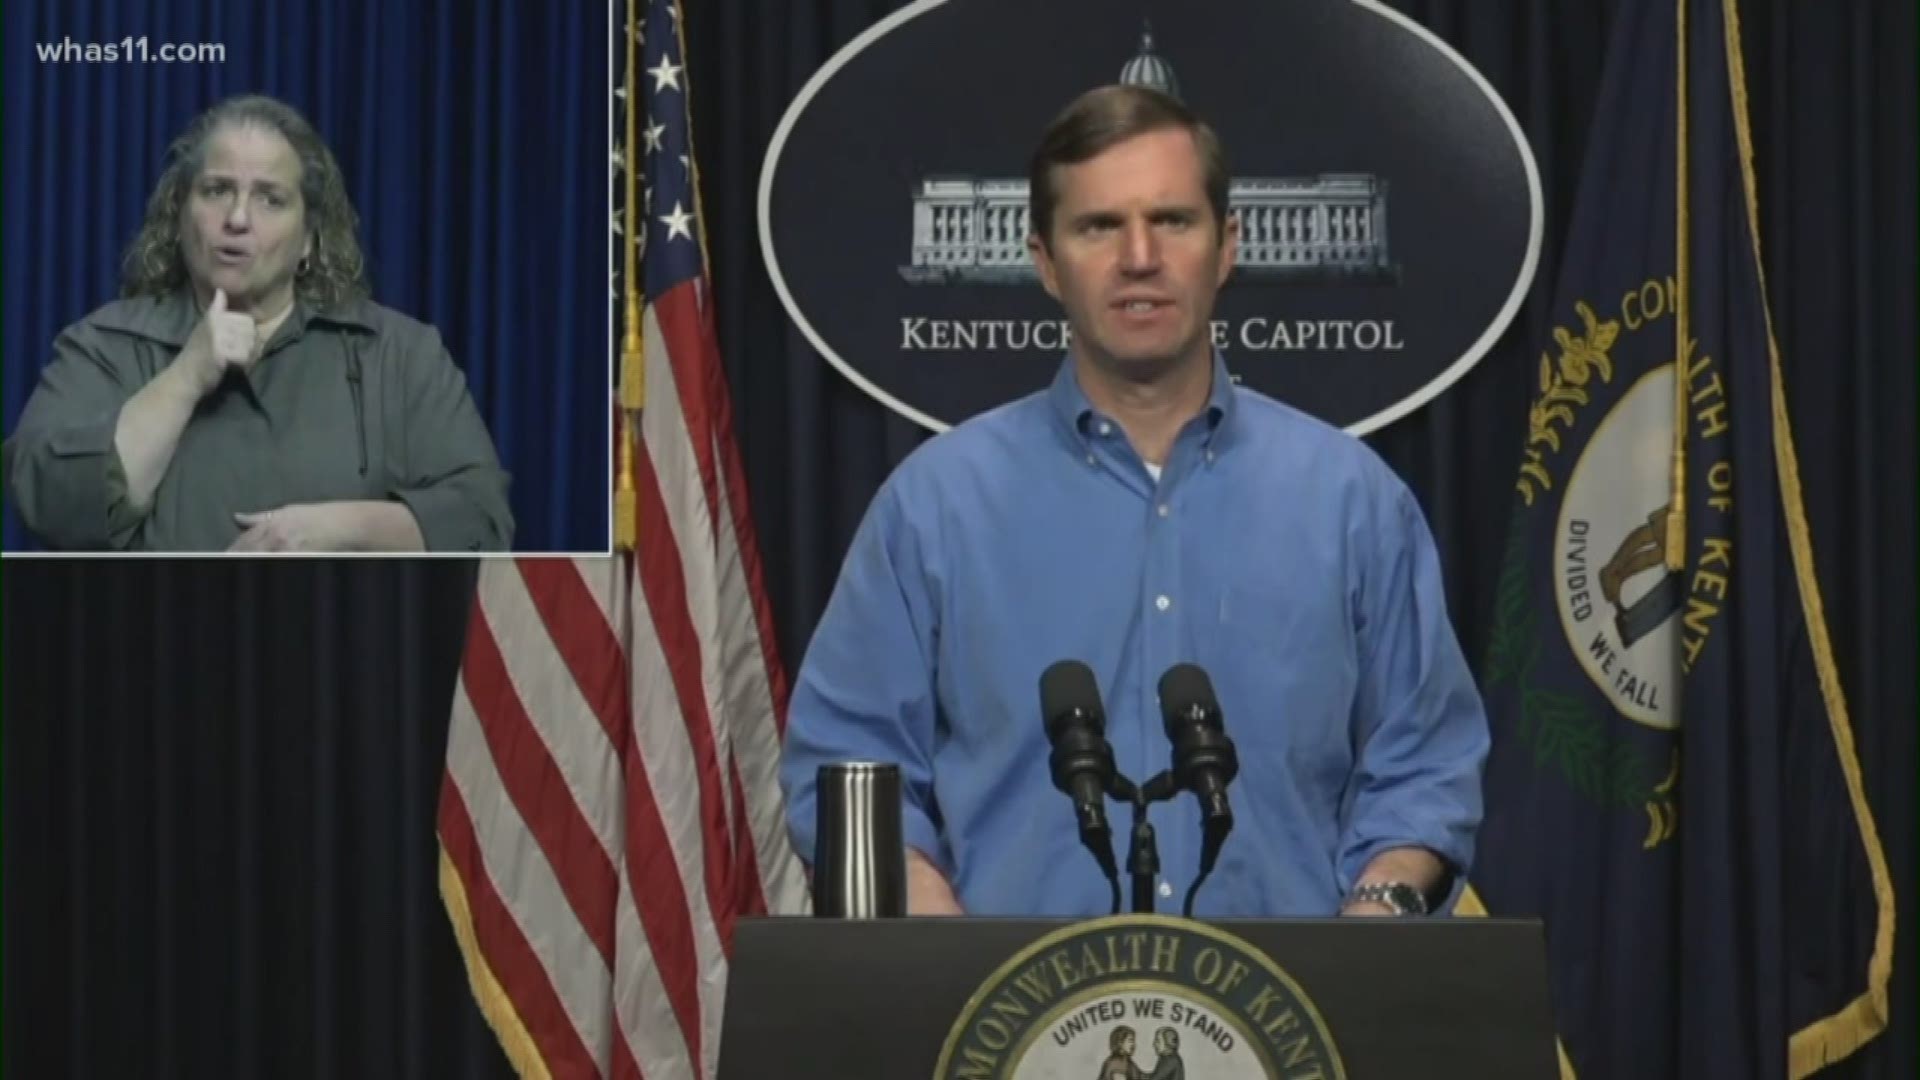 The governor said Kentucky had 114 cases and 7 deaths from COVID-19 statewide.